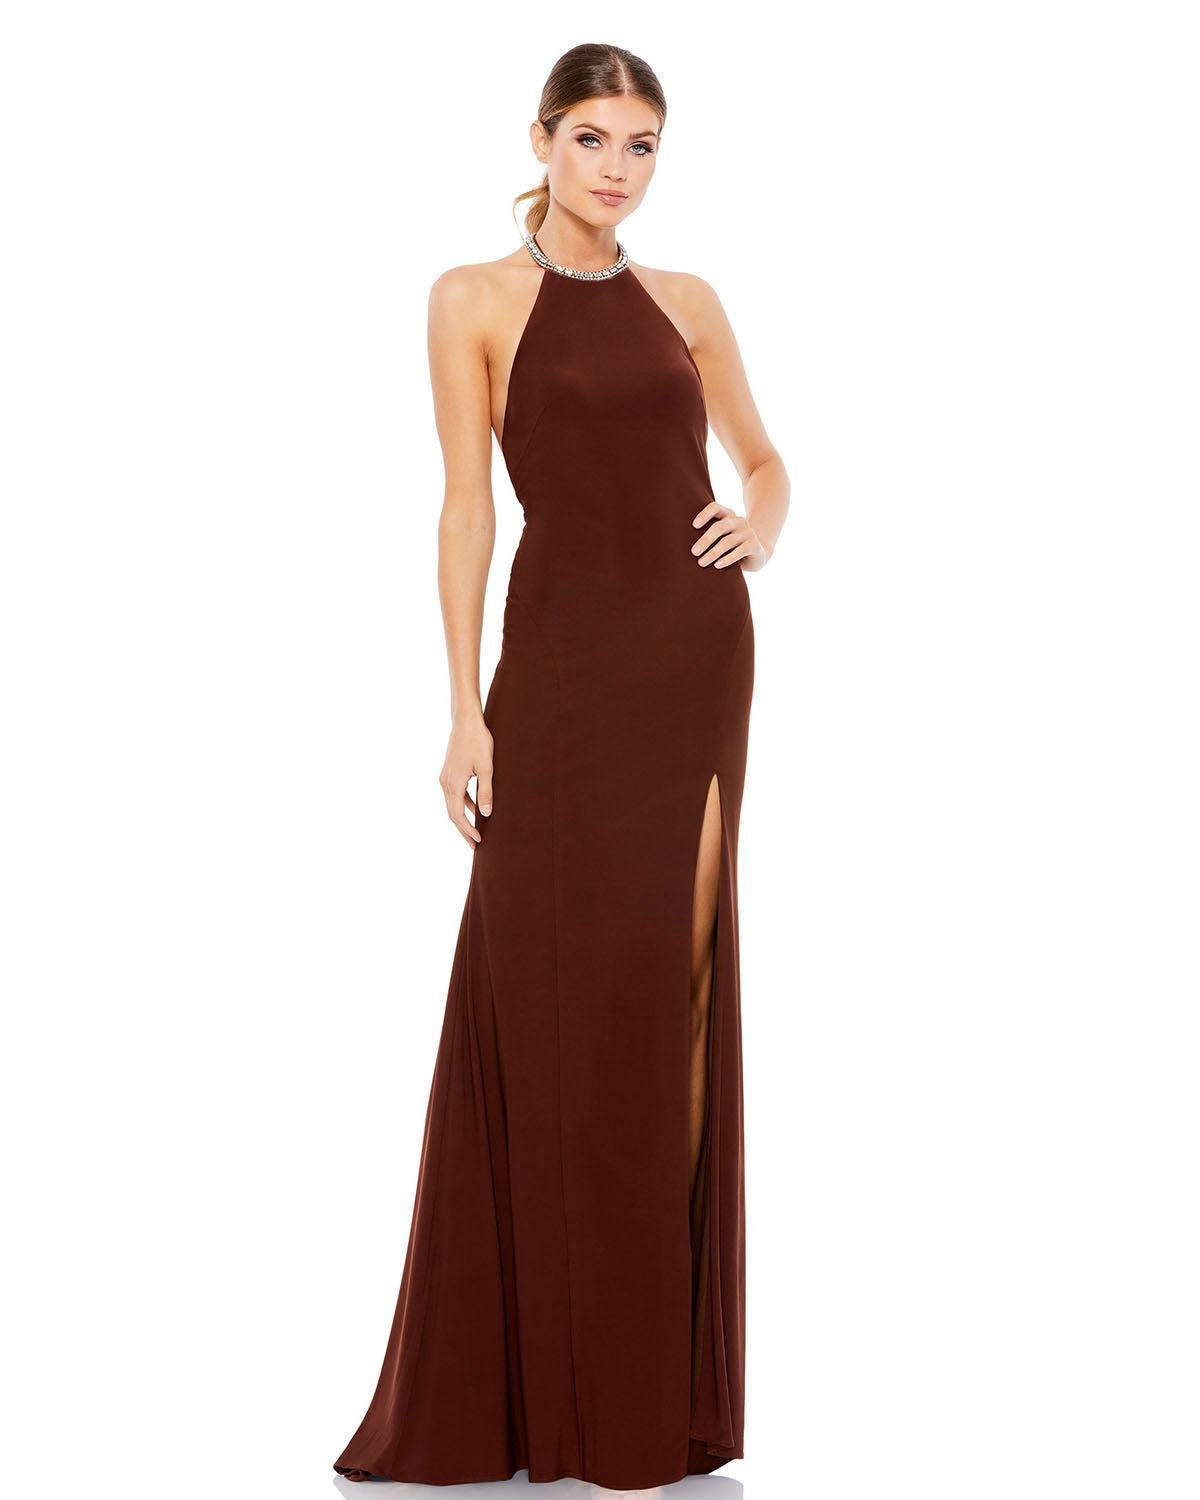 Sequin Halter Neck Top A-Line Backless Evening Dress With Tulle